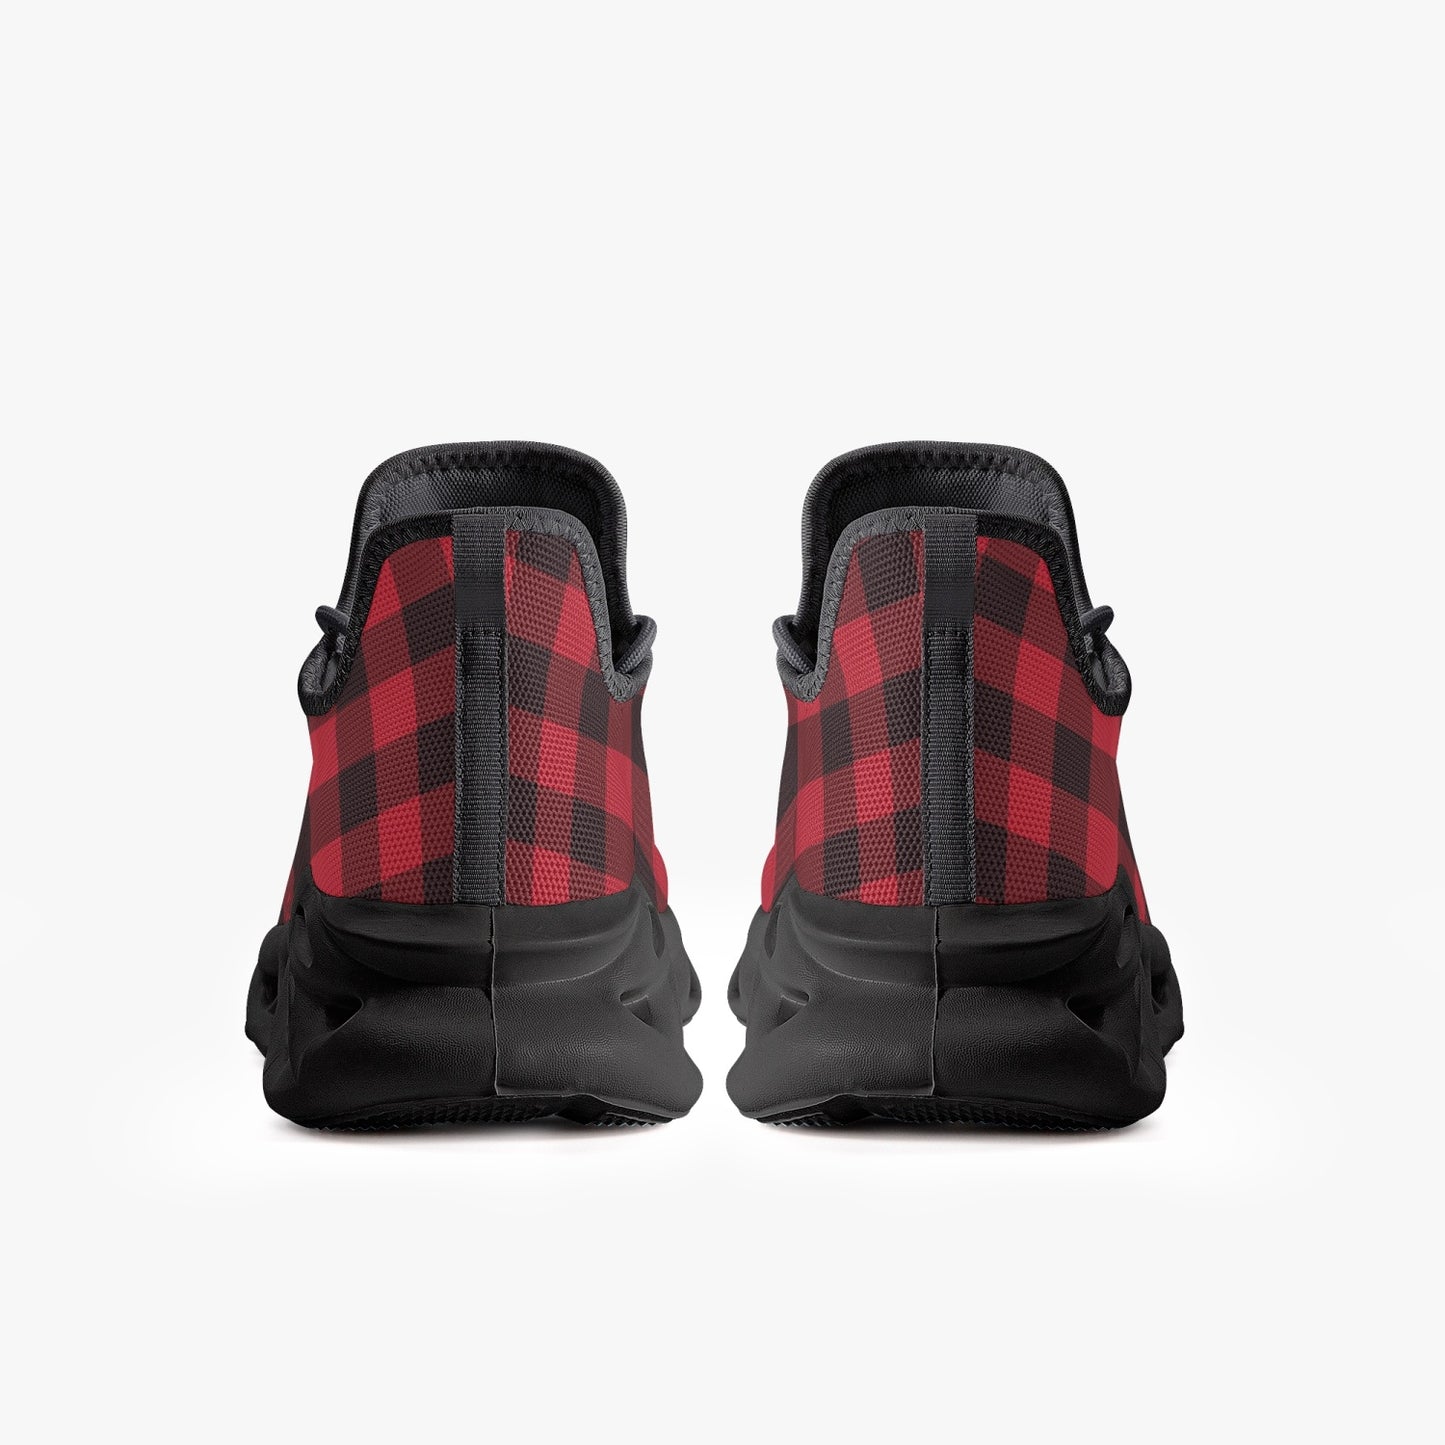 Red Black Buffalo Plaid Men Sneakers, Check Bouncing Mesh Knit Running Athletic Sport Gym Workout Breathable Lace Up Fitness Shoes Trainers